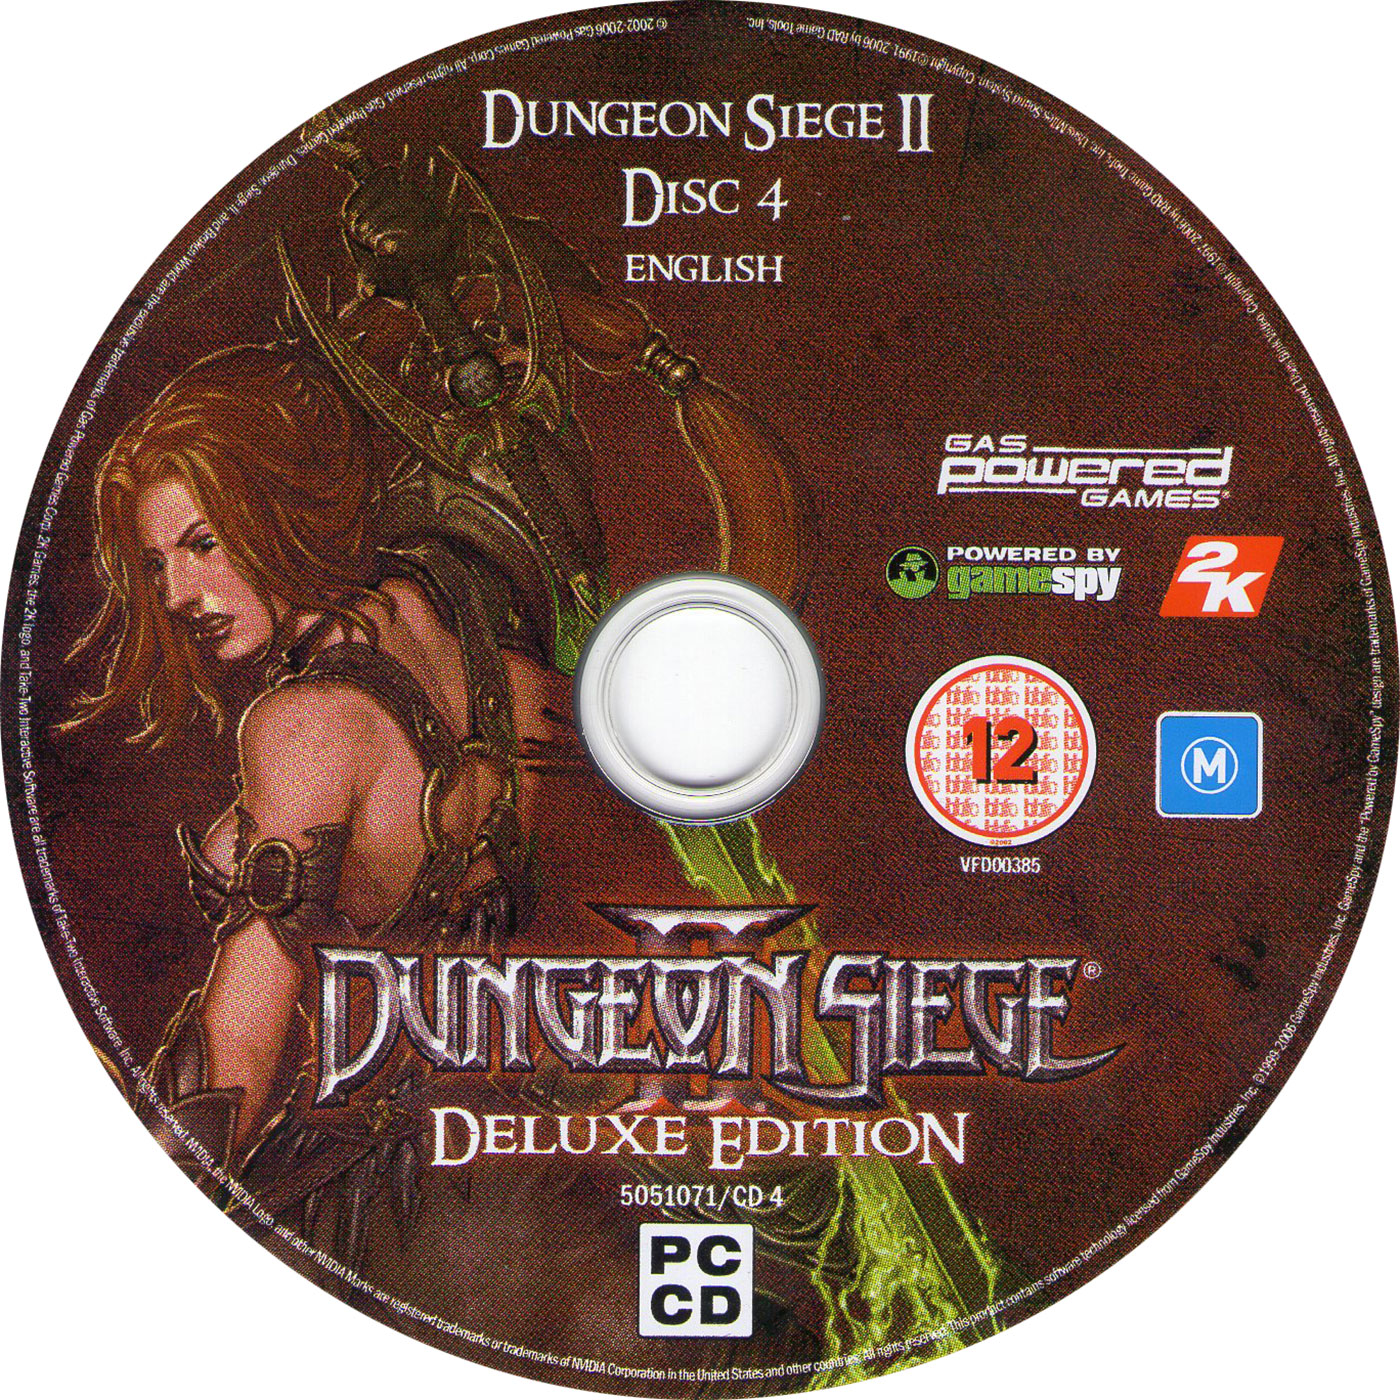 Dungeon Siege II: Deluxe Edition - CD obal 4